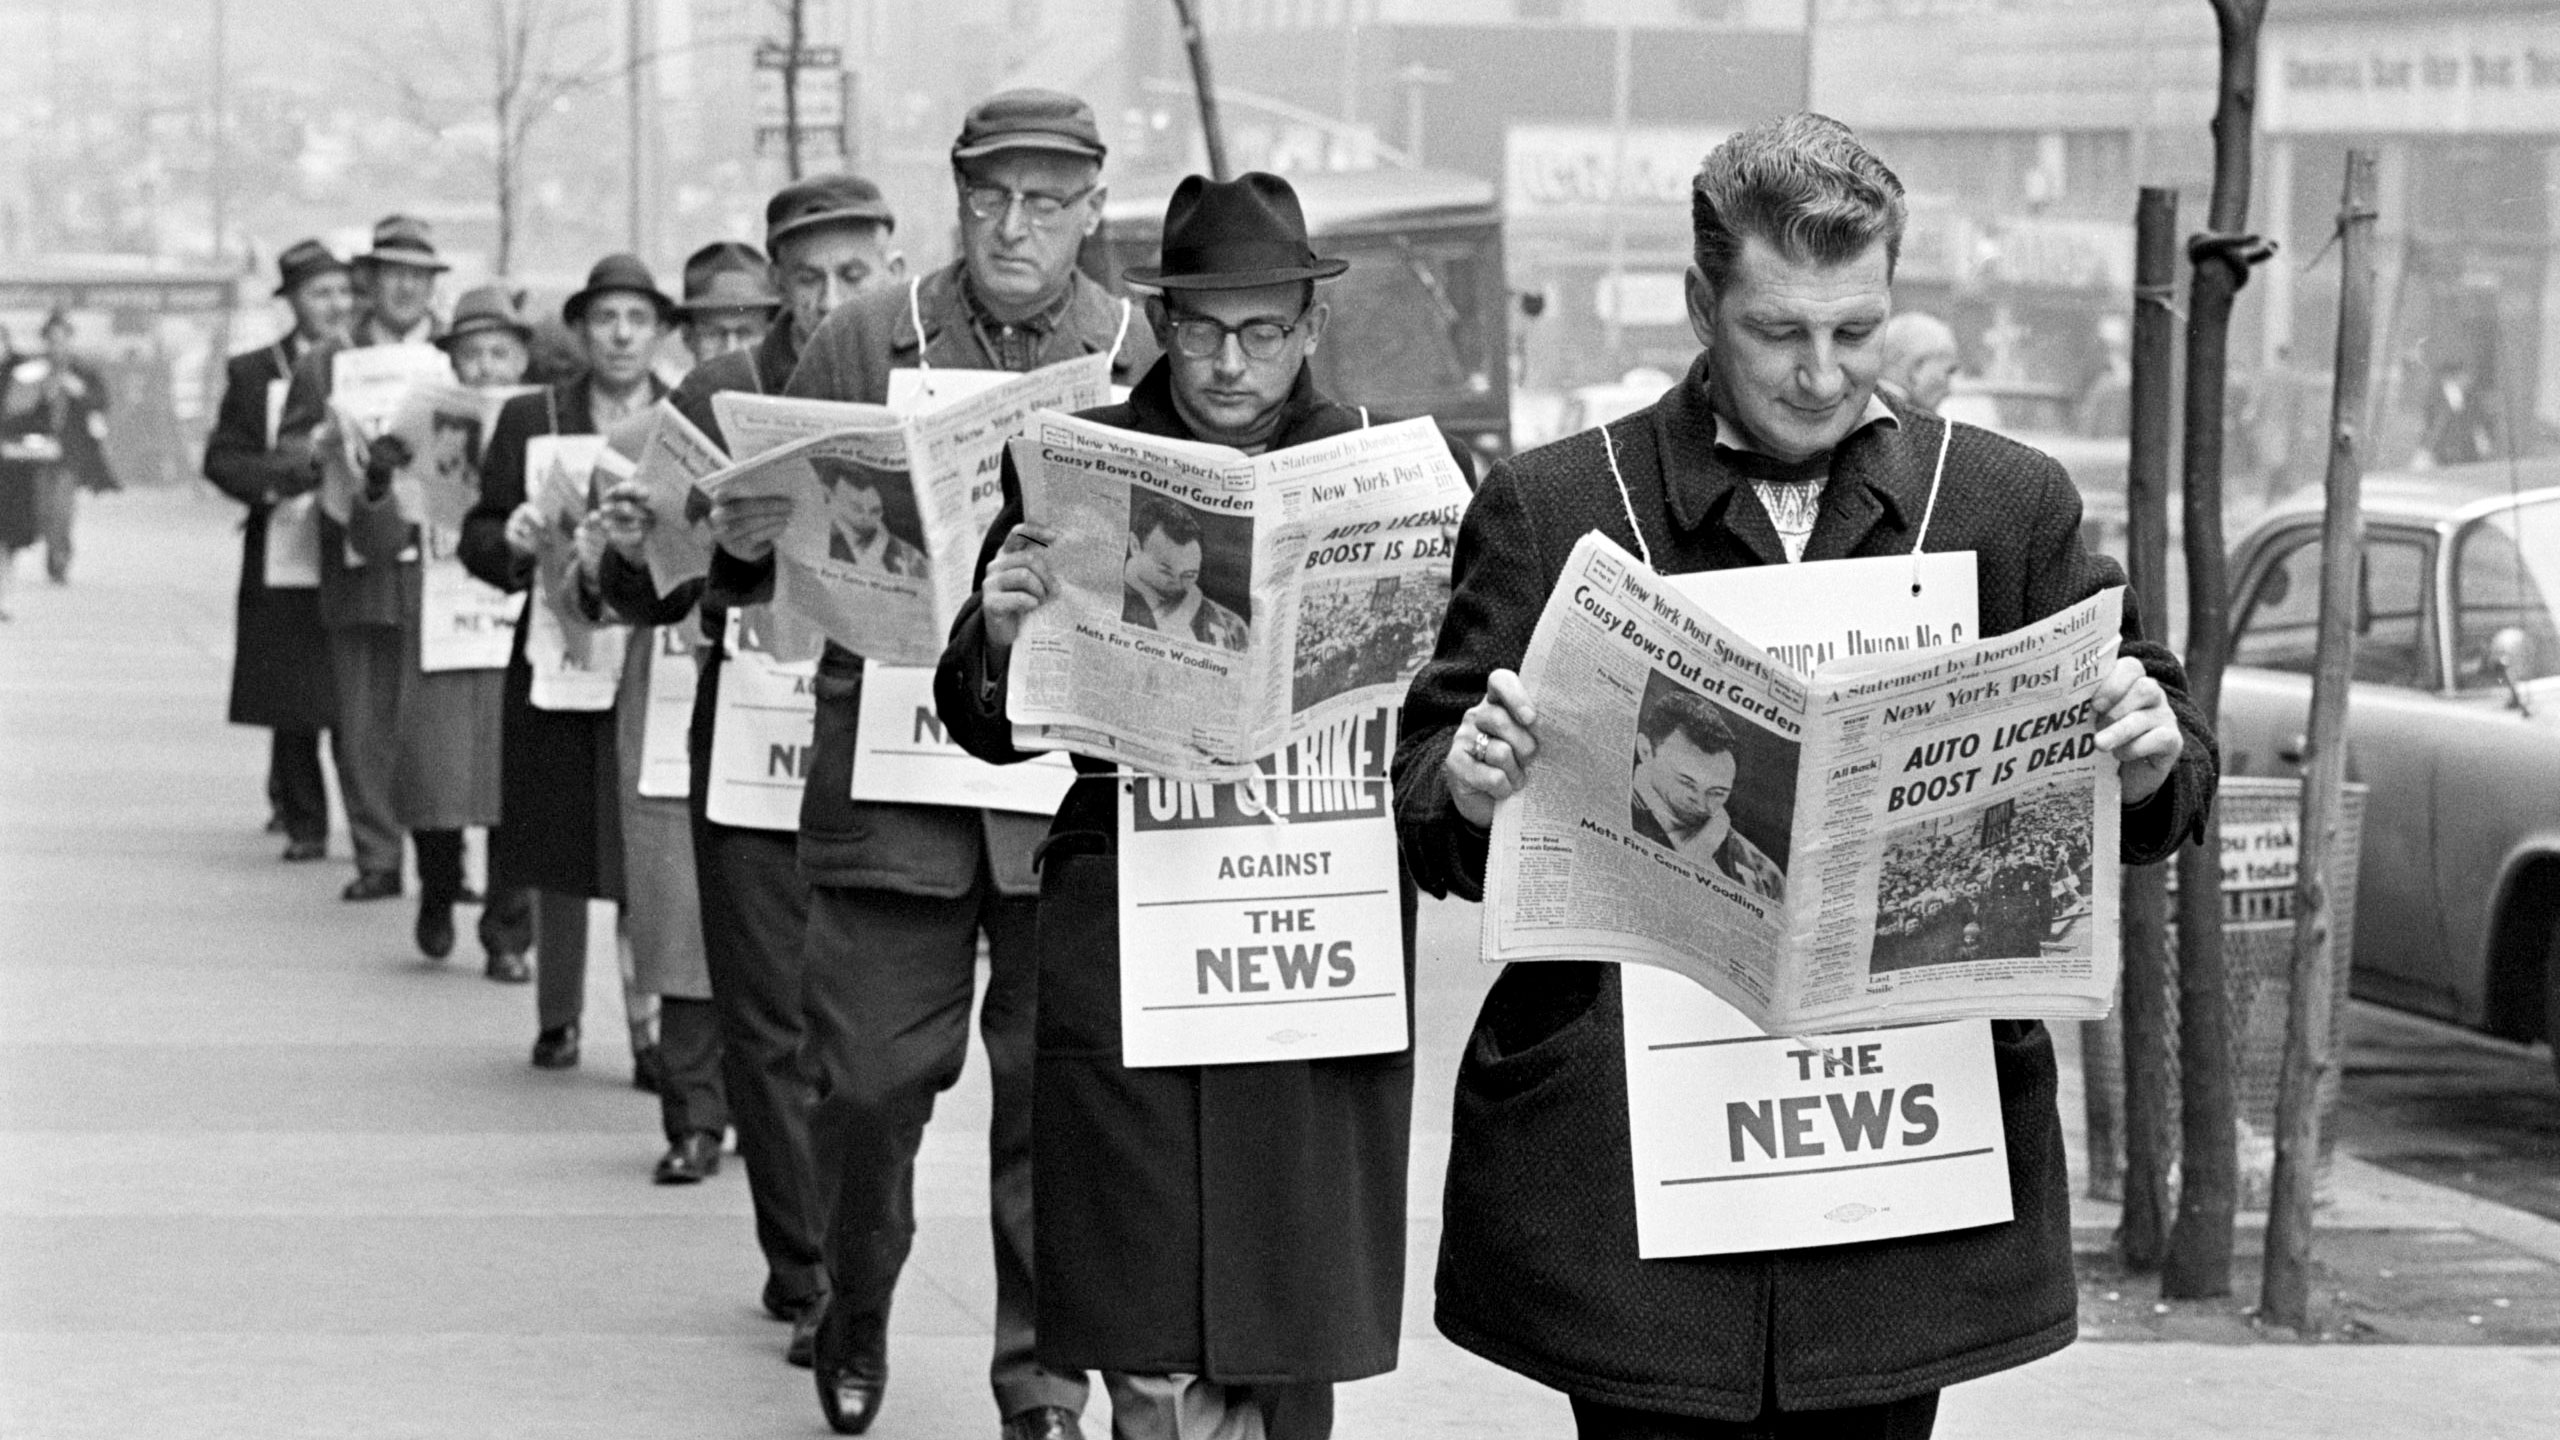 Television and newspapers. A History of News.